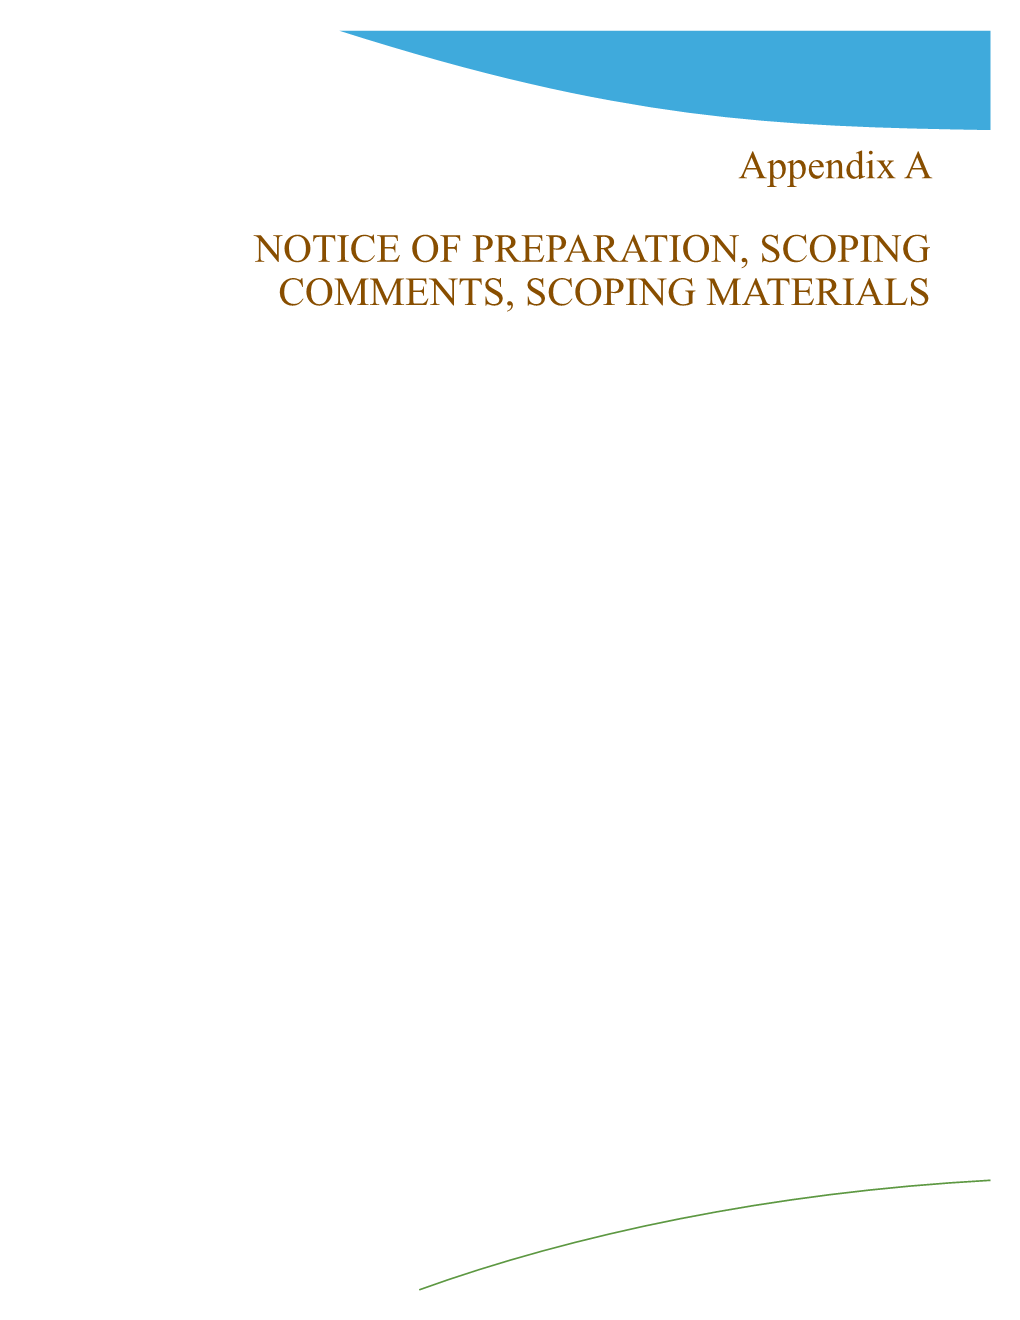 Notice of Preparation, Scoping, Comments, Scoping Materials